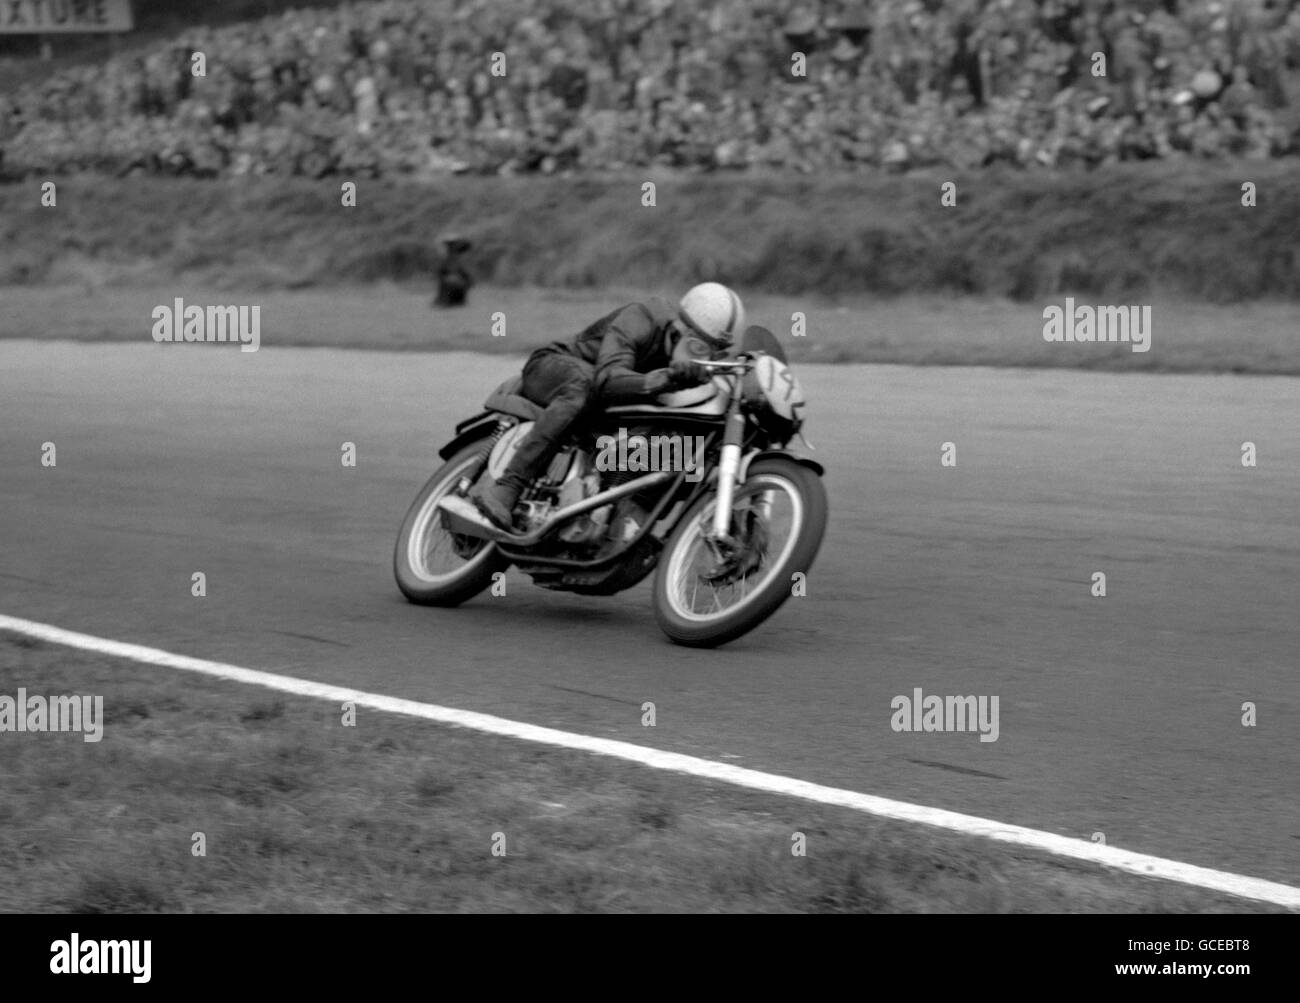 Brilliant youngster John Surtees streaks round Brands Hatch on his way to victory over World Motor Cycle champion Geoff Duke. Surtees, riding a Norton, triumphed in an exciting duel during the non-championship event Stock Photo